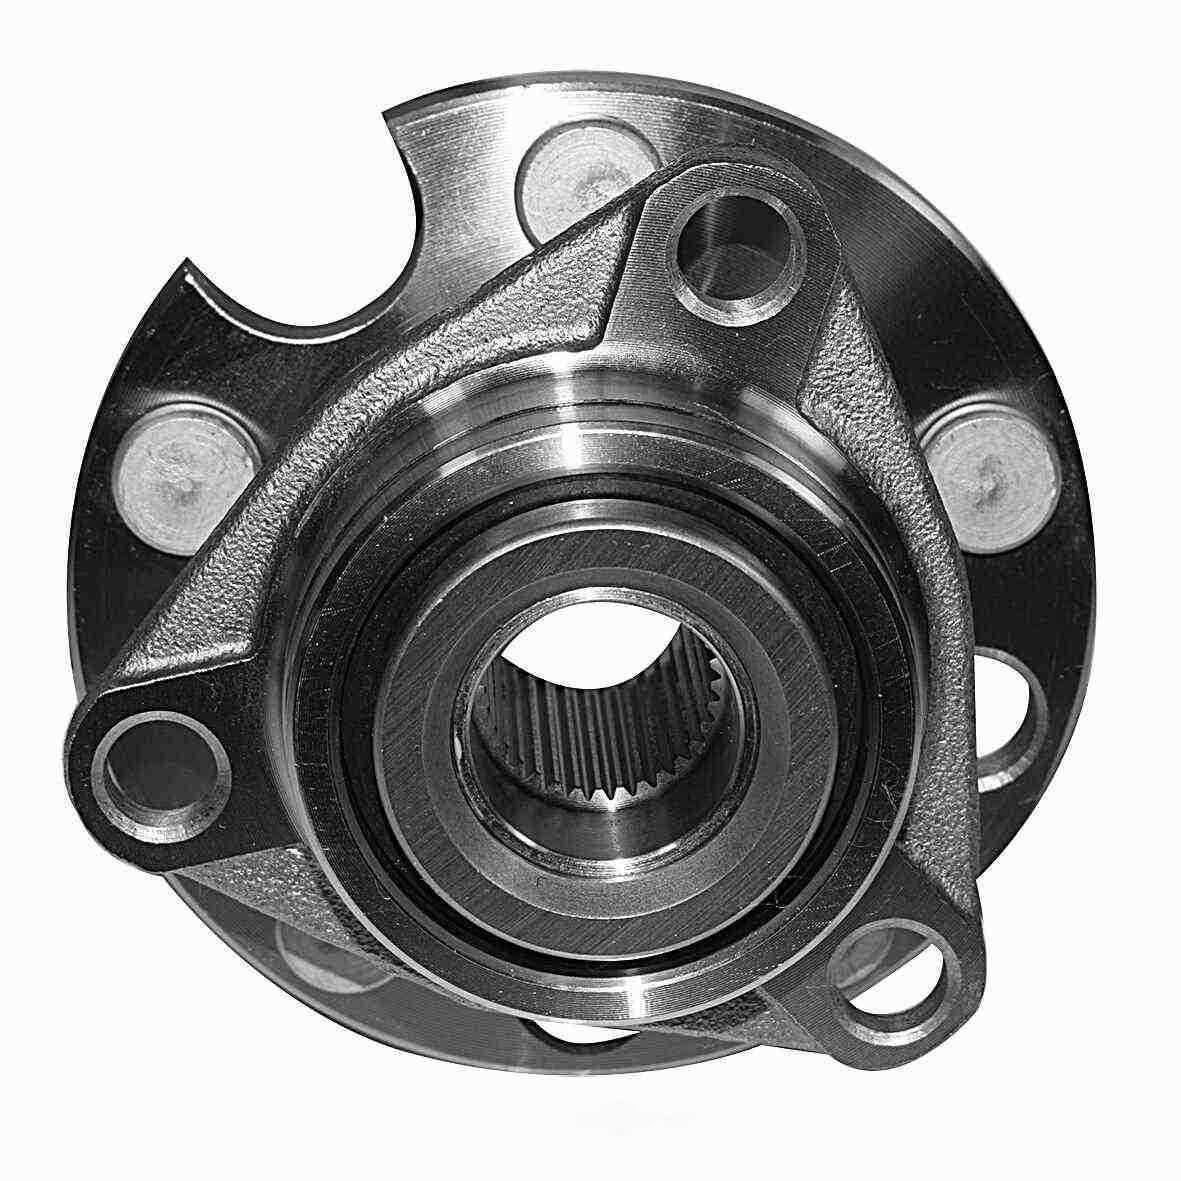 GSP NORTH AMERICA INC. - GSP New Wheel Bearing and Hub Assembly (Front Left) - AD8 104011